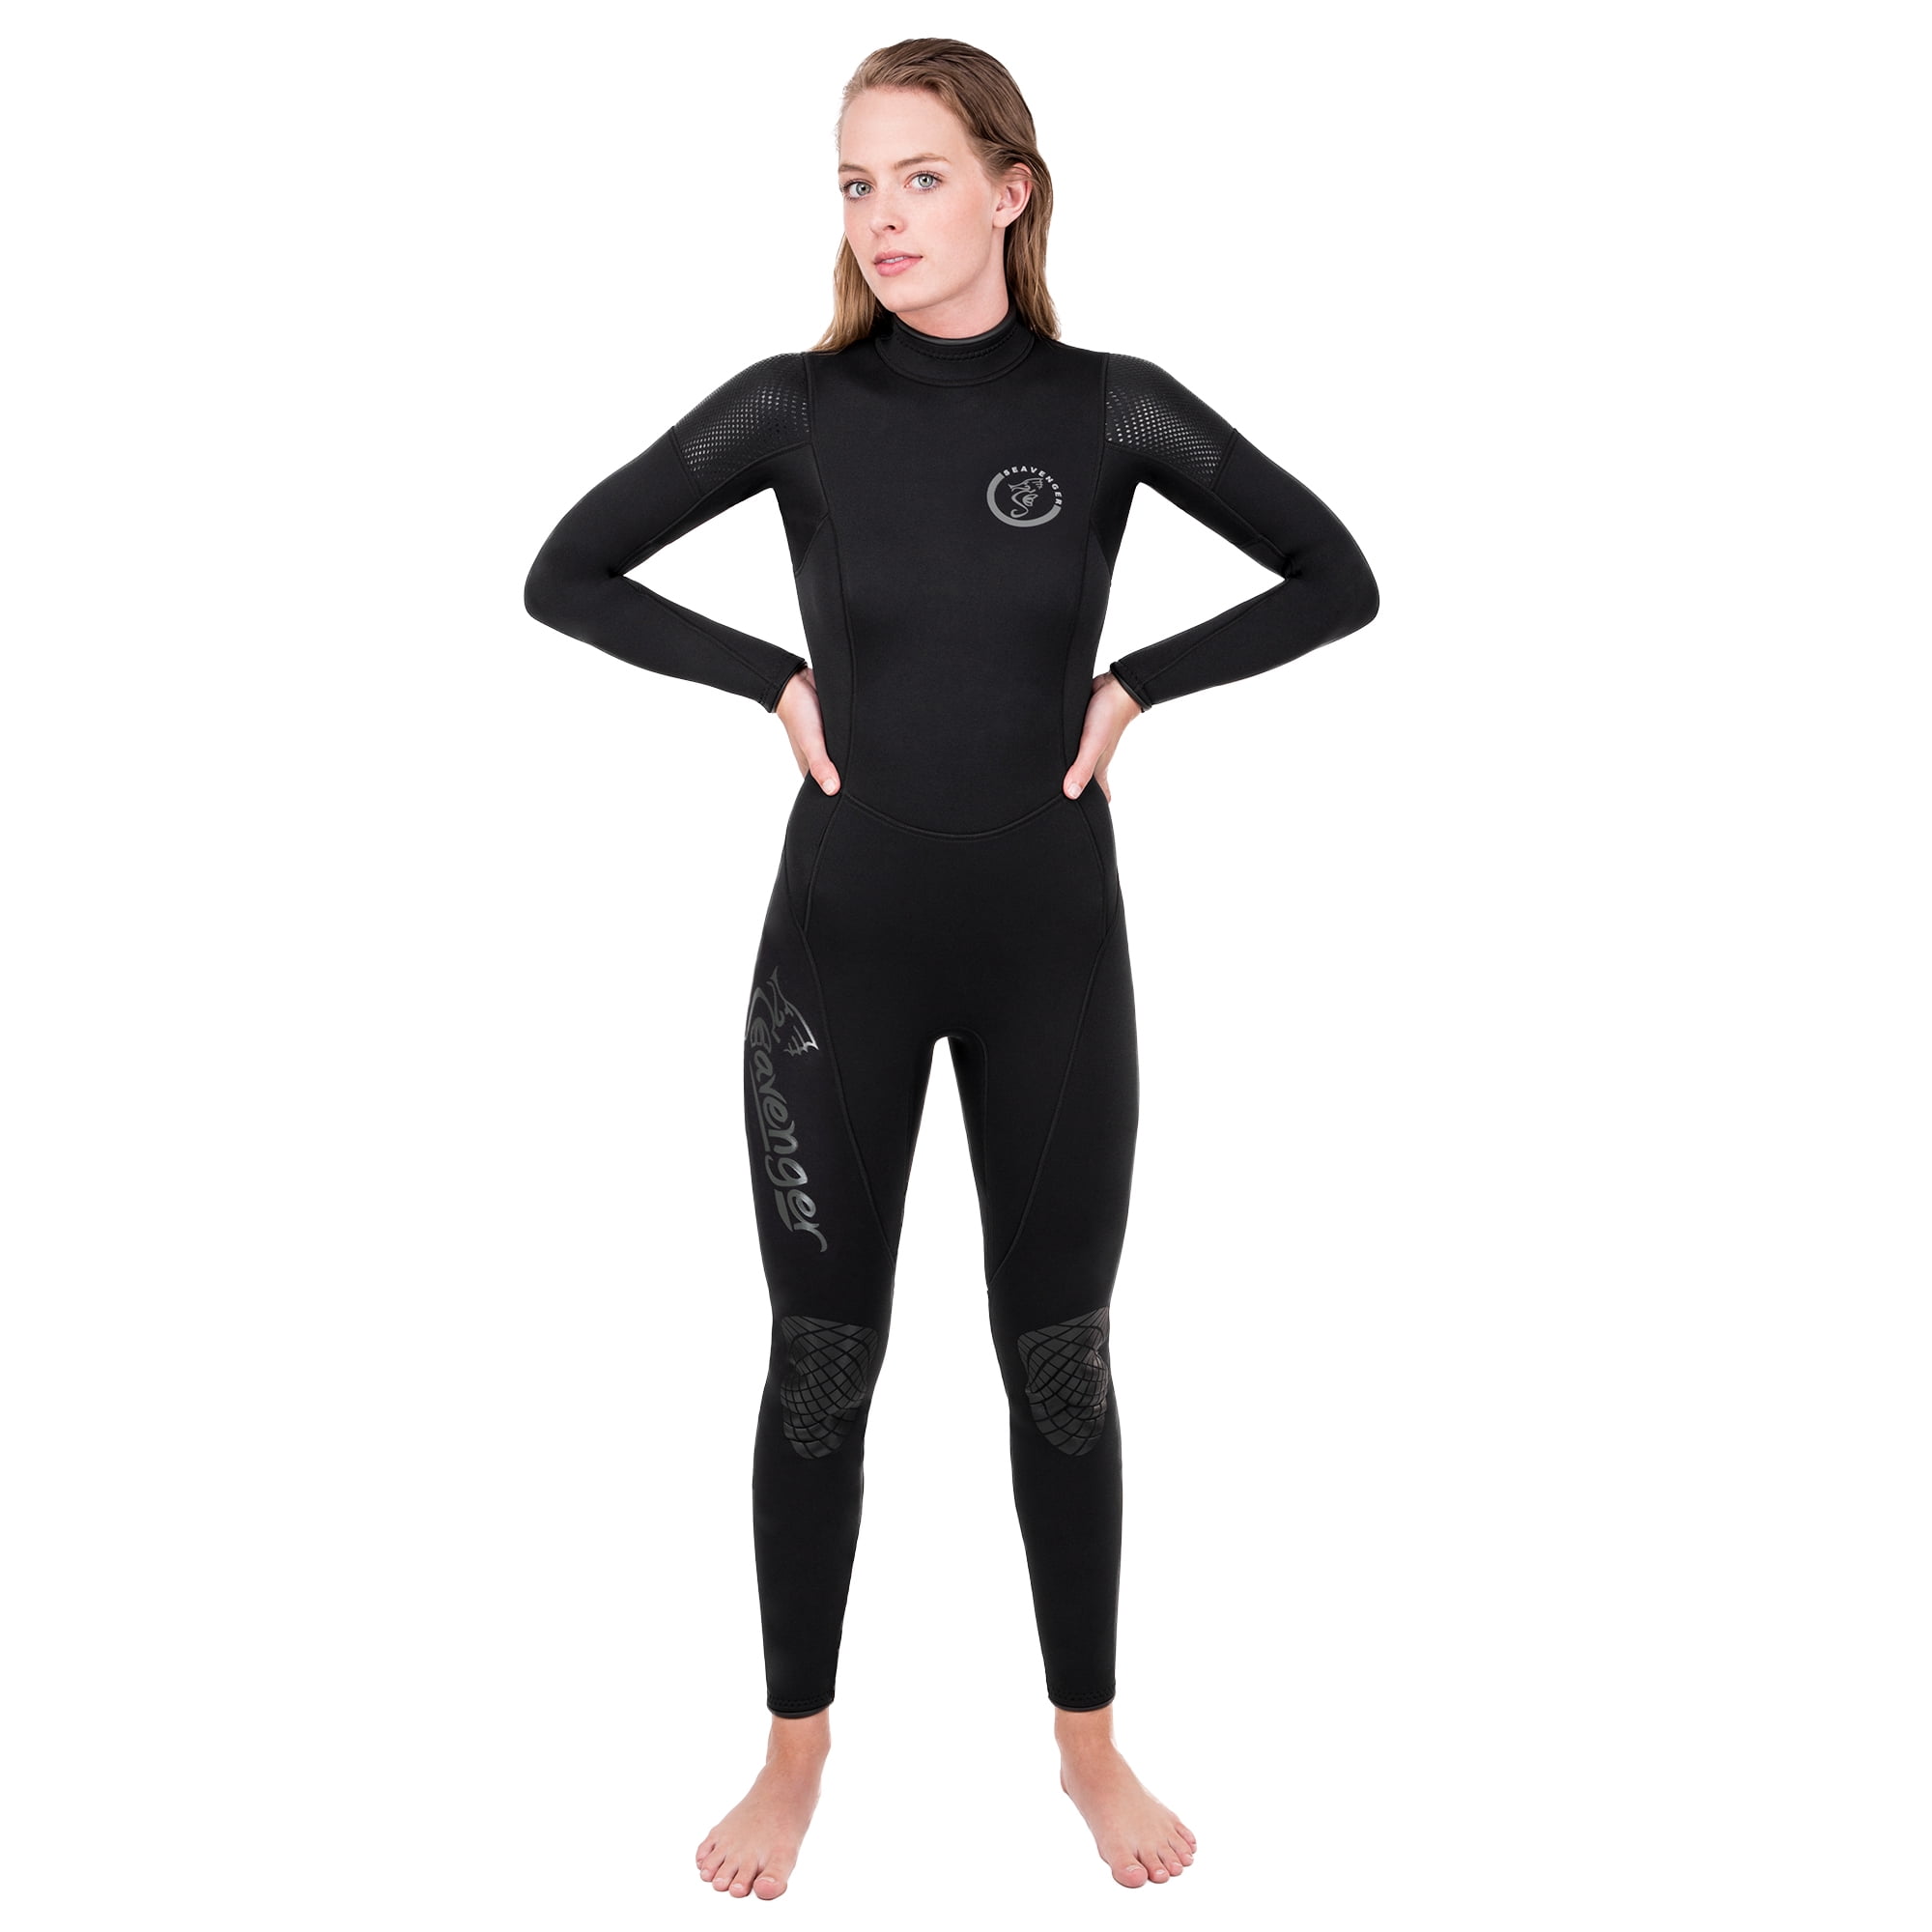 Scuba Diving, Details about   3mm Neoprene Wetsuit with Stretch Panels Perfect for Snorkeling 